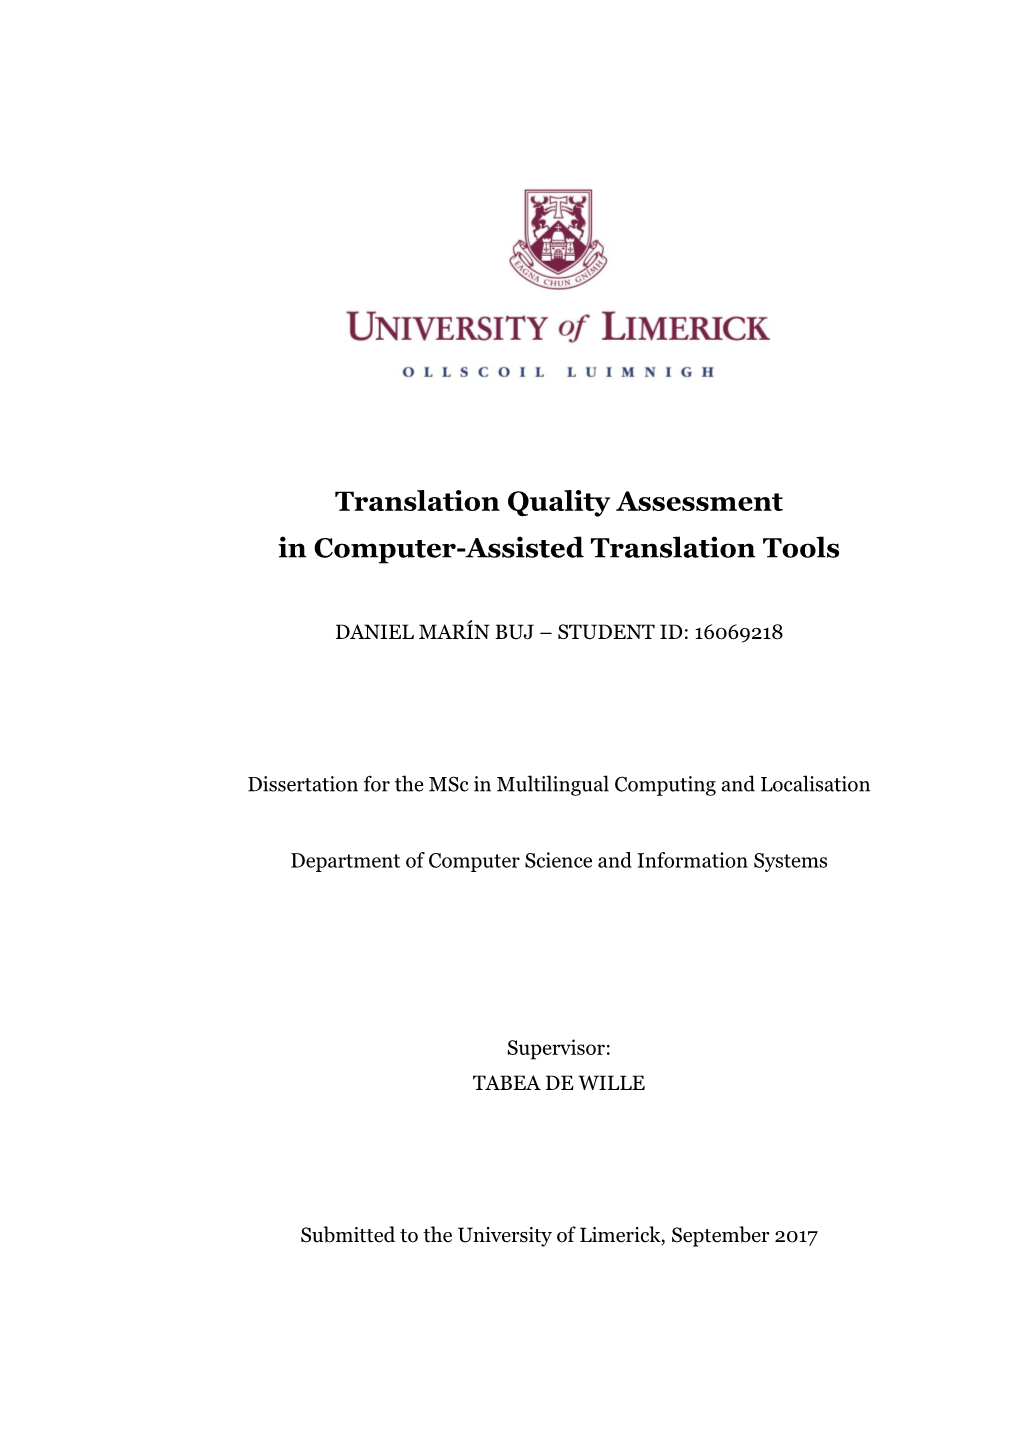 Translation Quality Assessment in Computer-Assisted Translation Tools